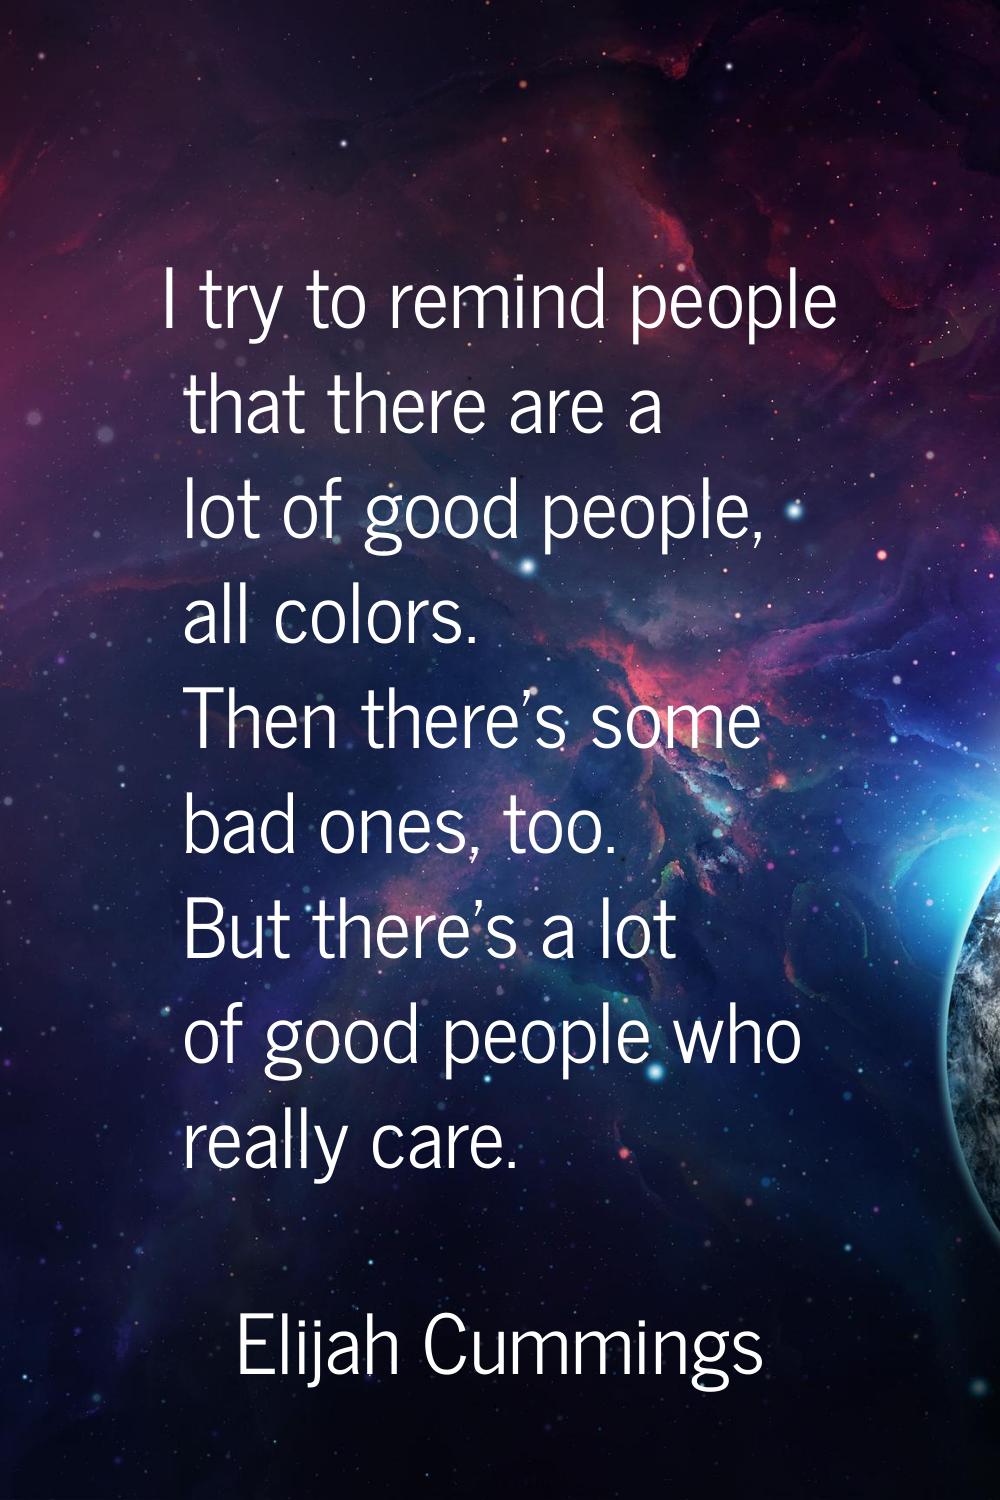 I try to remind people that there are a lot of good people, all colors. Then there's some bad ones,